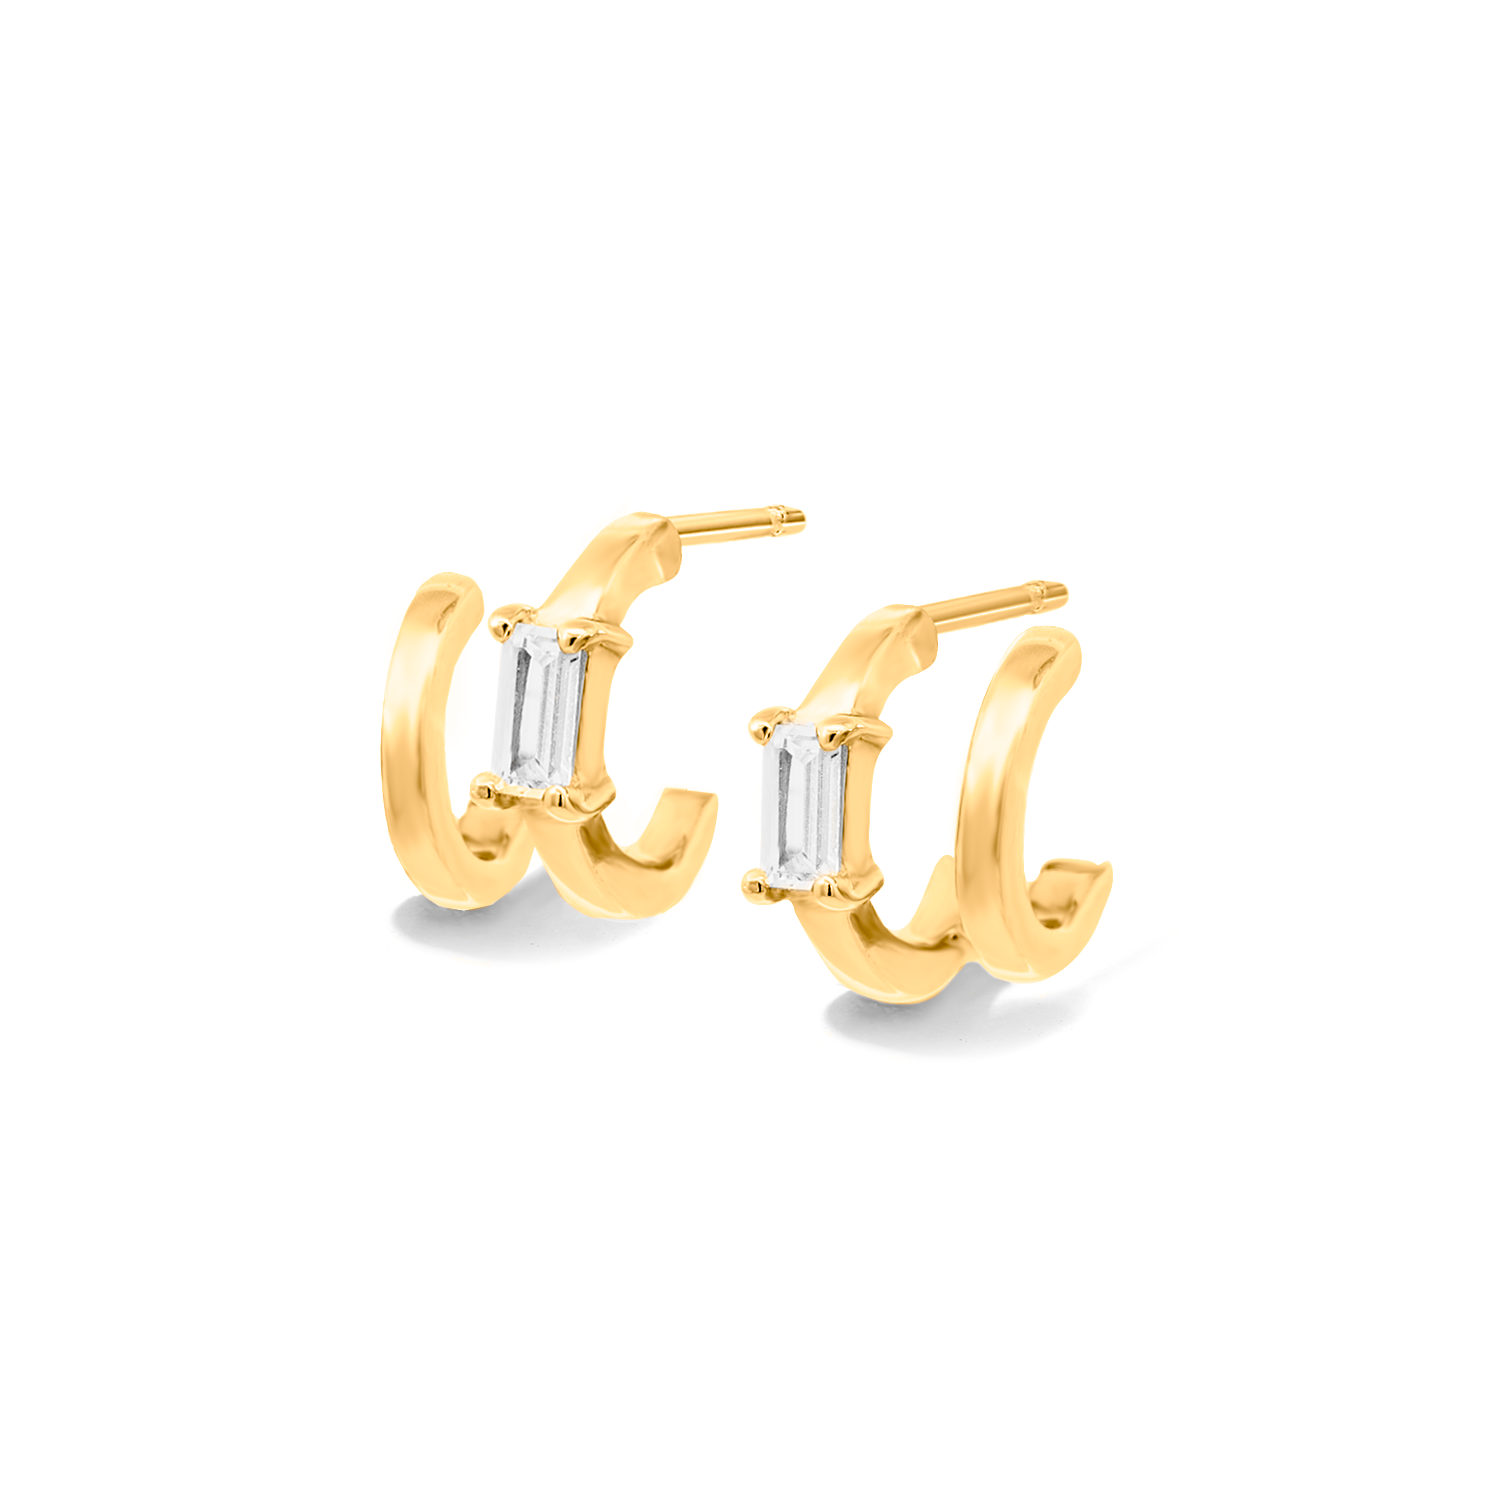 Dainty and minimalist huggies in gold with cubic zirconia